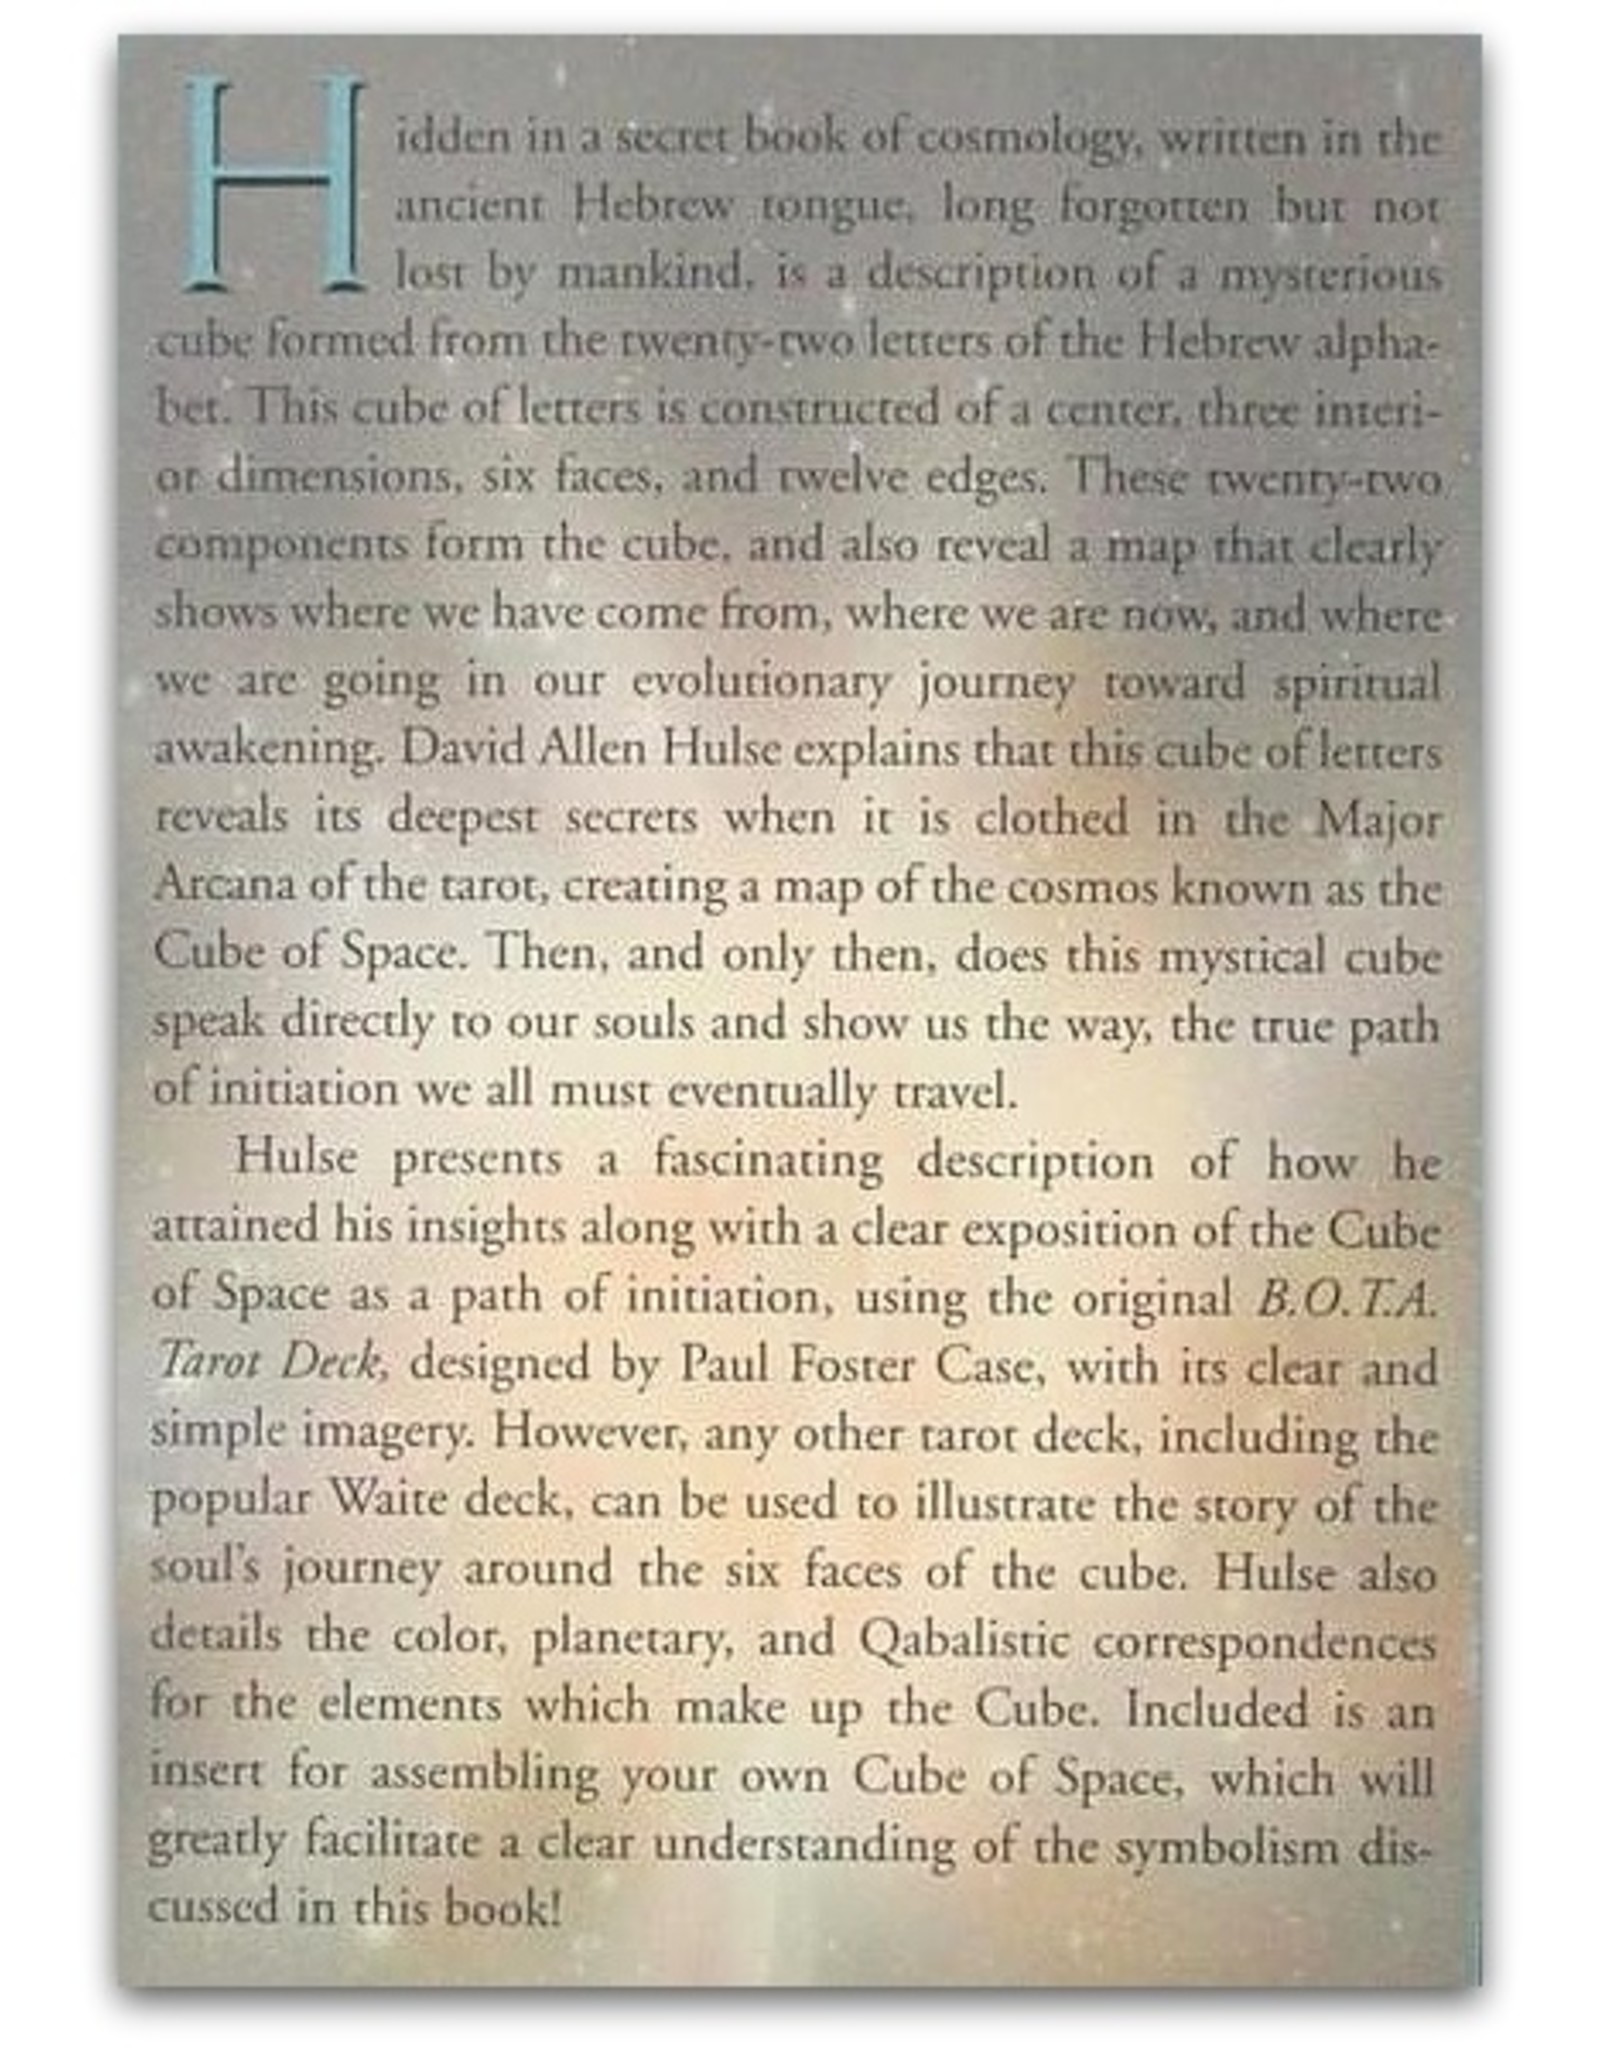 David Allen Hulse - New Dimensions for the Cube of Space. The Path of Initiation Revealed by the Tarot upon the Qabalistic Cube